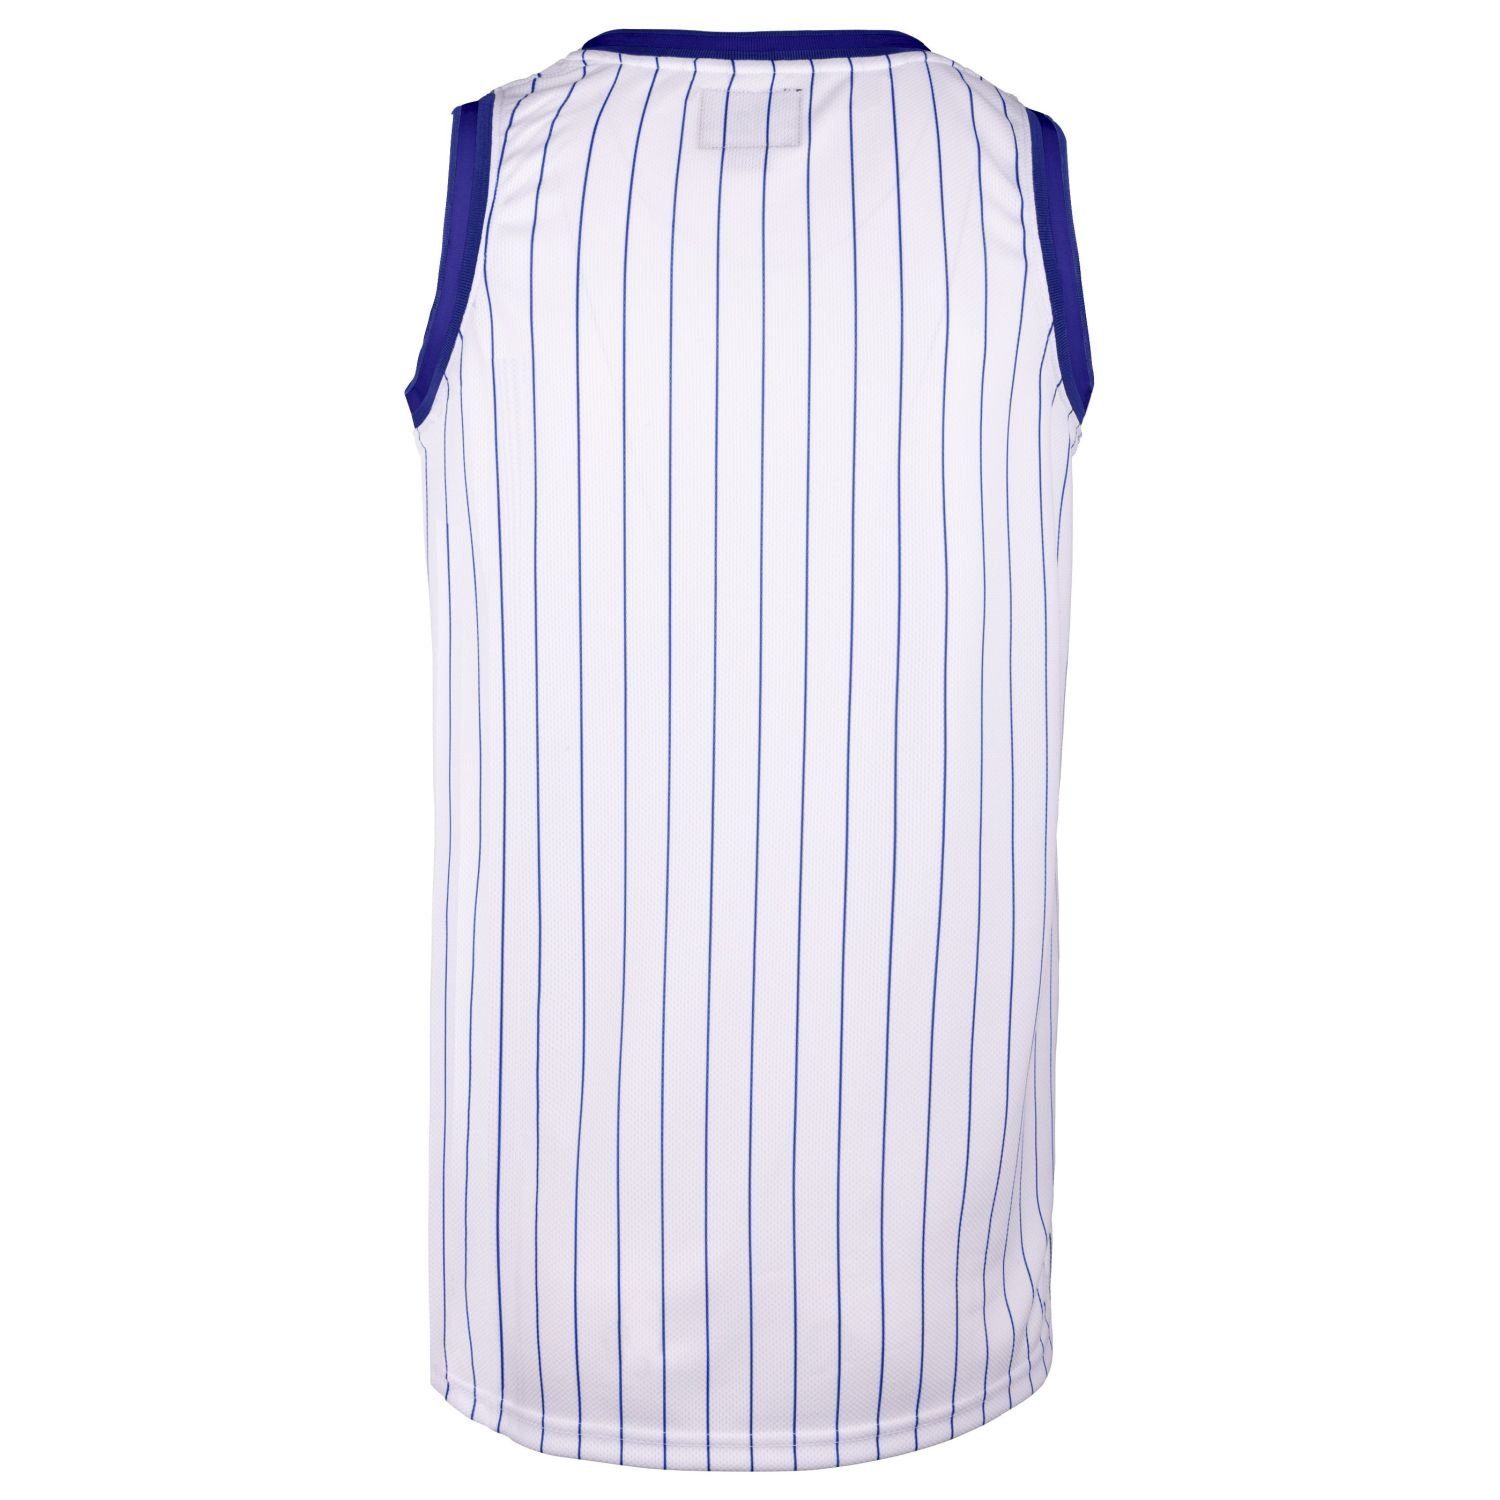 Angeles Brand '47 PINSTRIPED Muskelshirt Dodgers Los